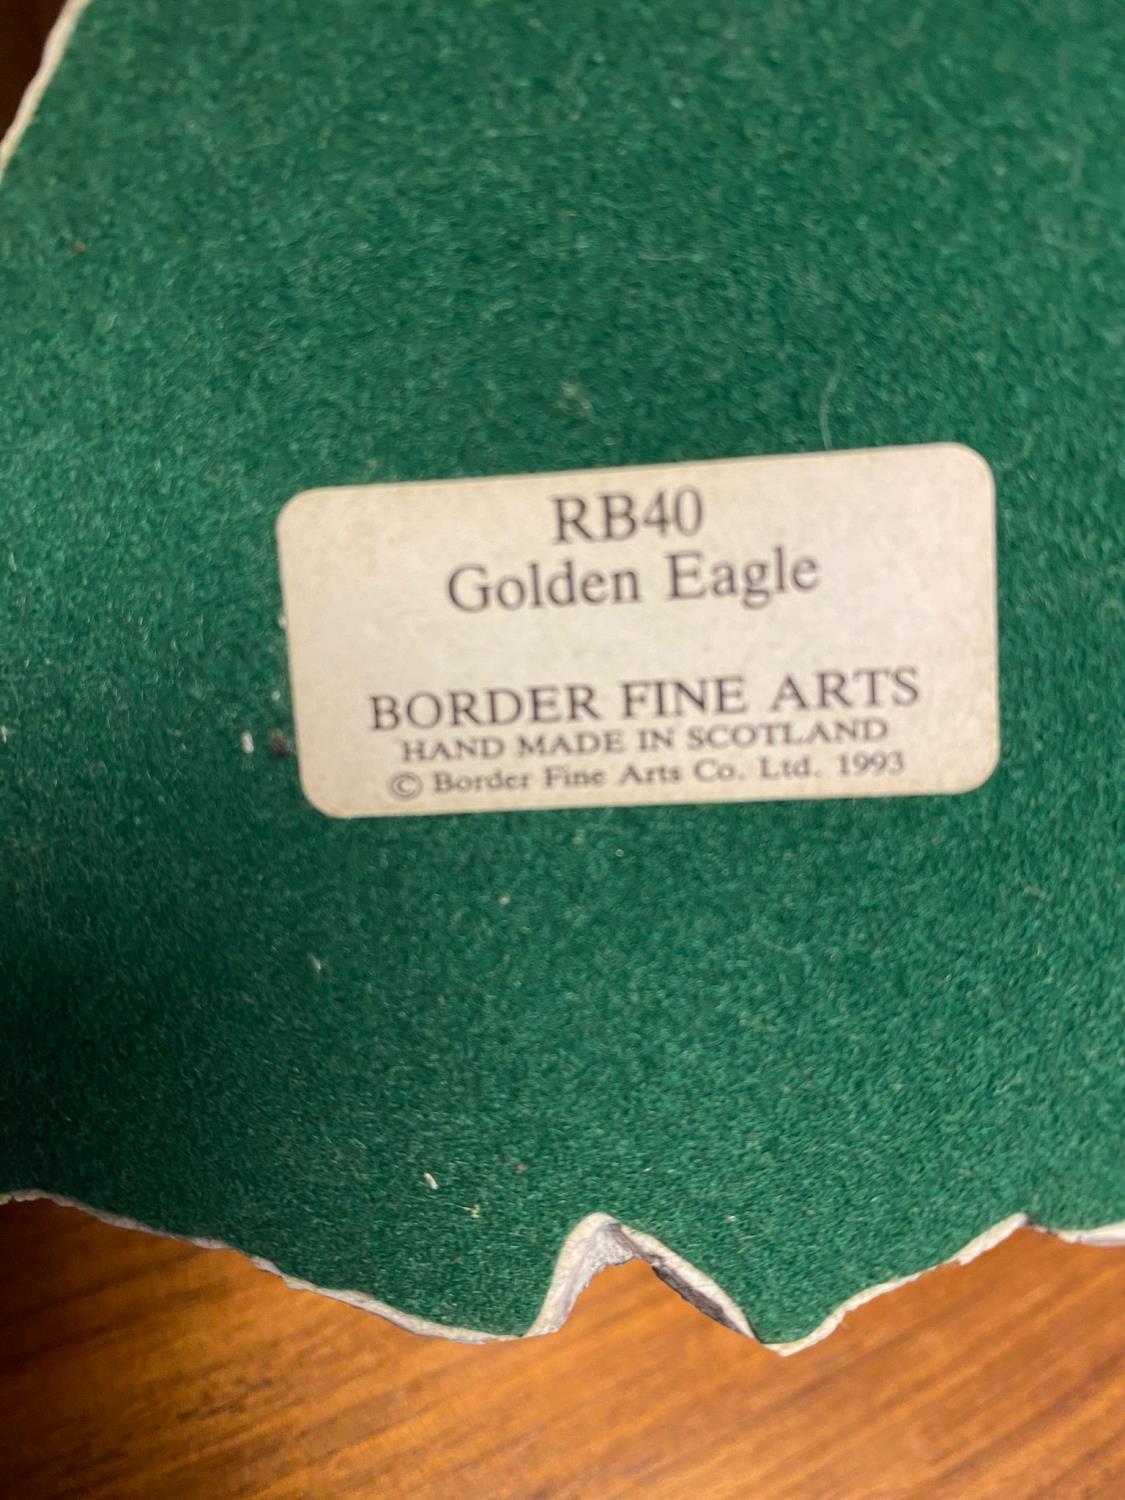 Border Fine Arts RB40 Golden Eagle with box - Image 2 of 2